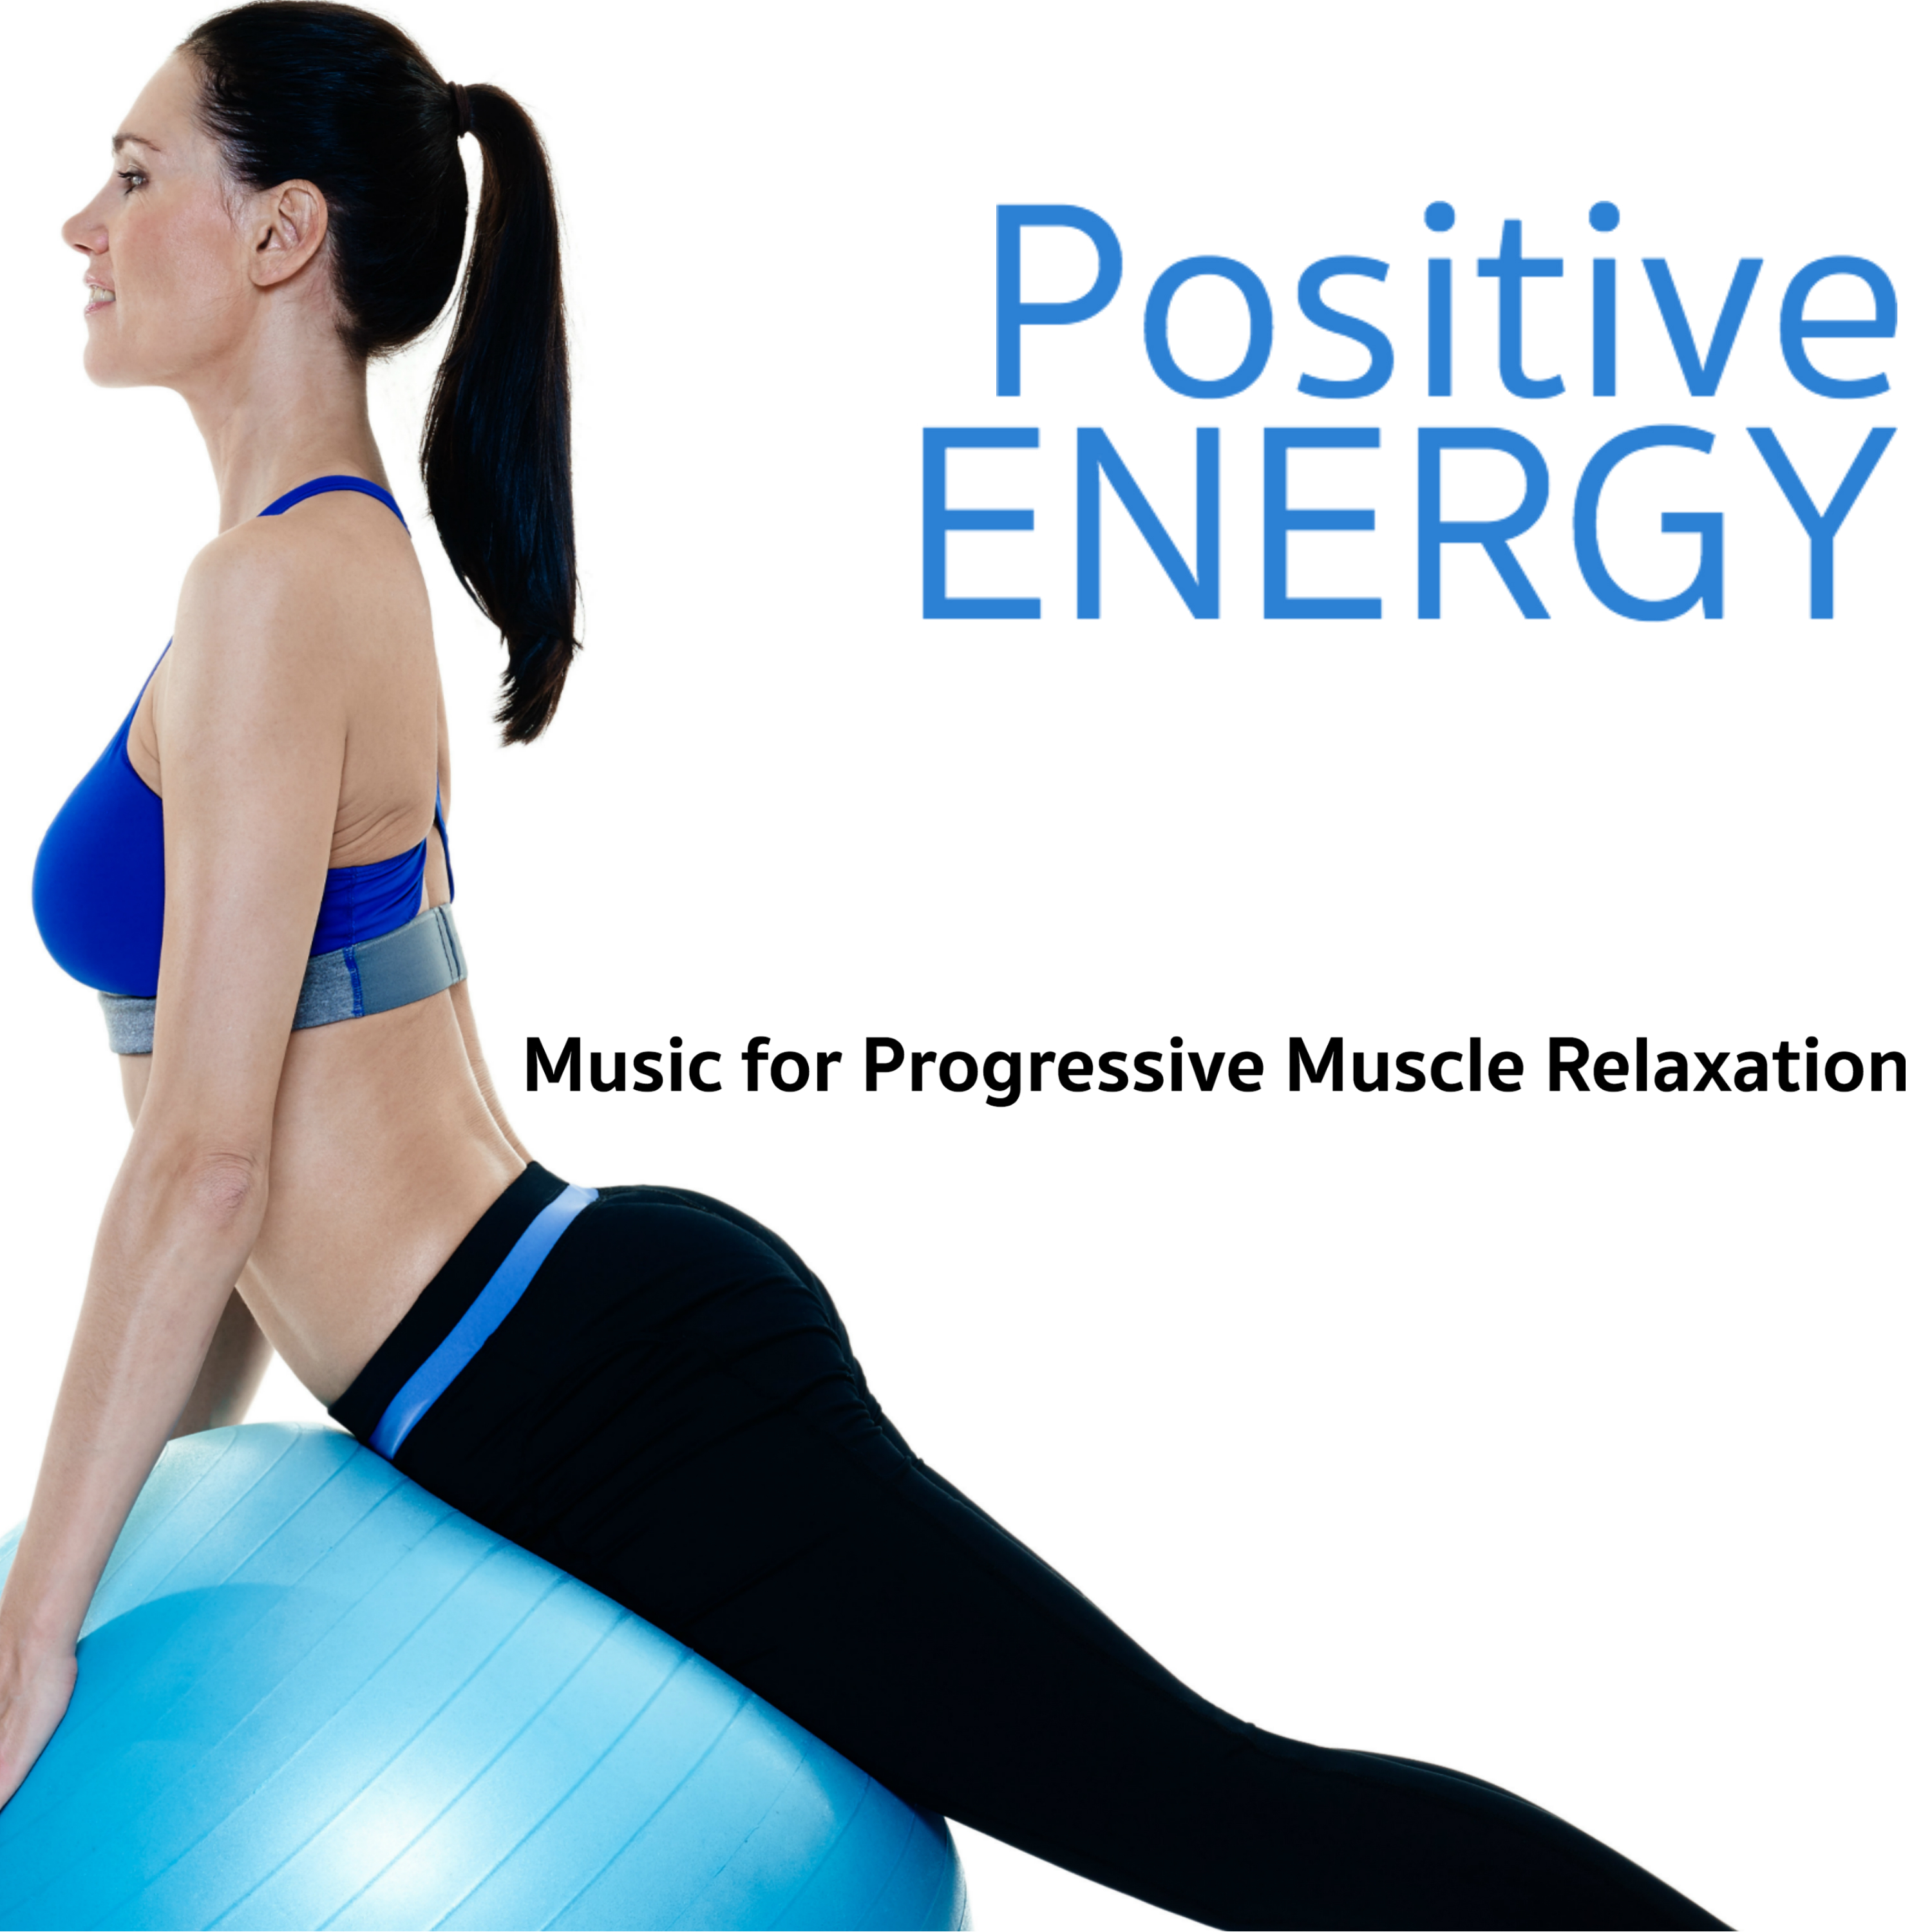 Positive Energy - Music for Progressive Muscle Relaxation, Inspiring Positive Thinking Songs